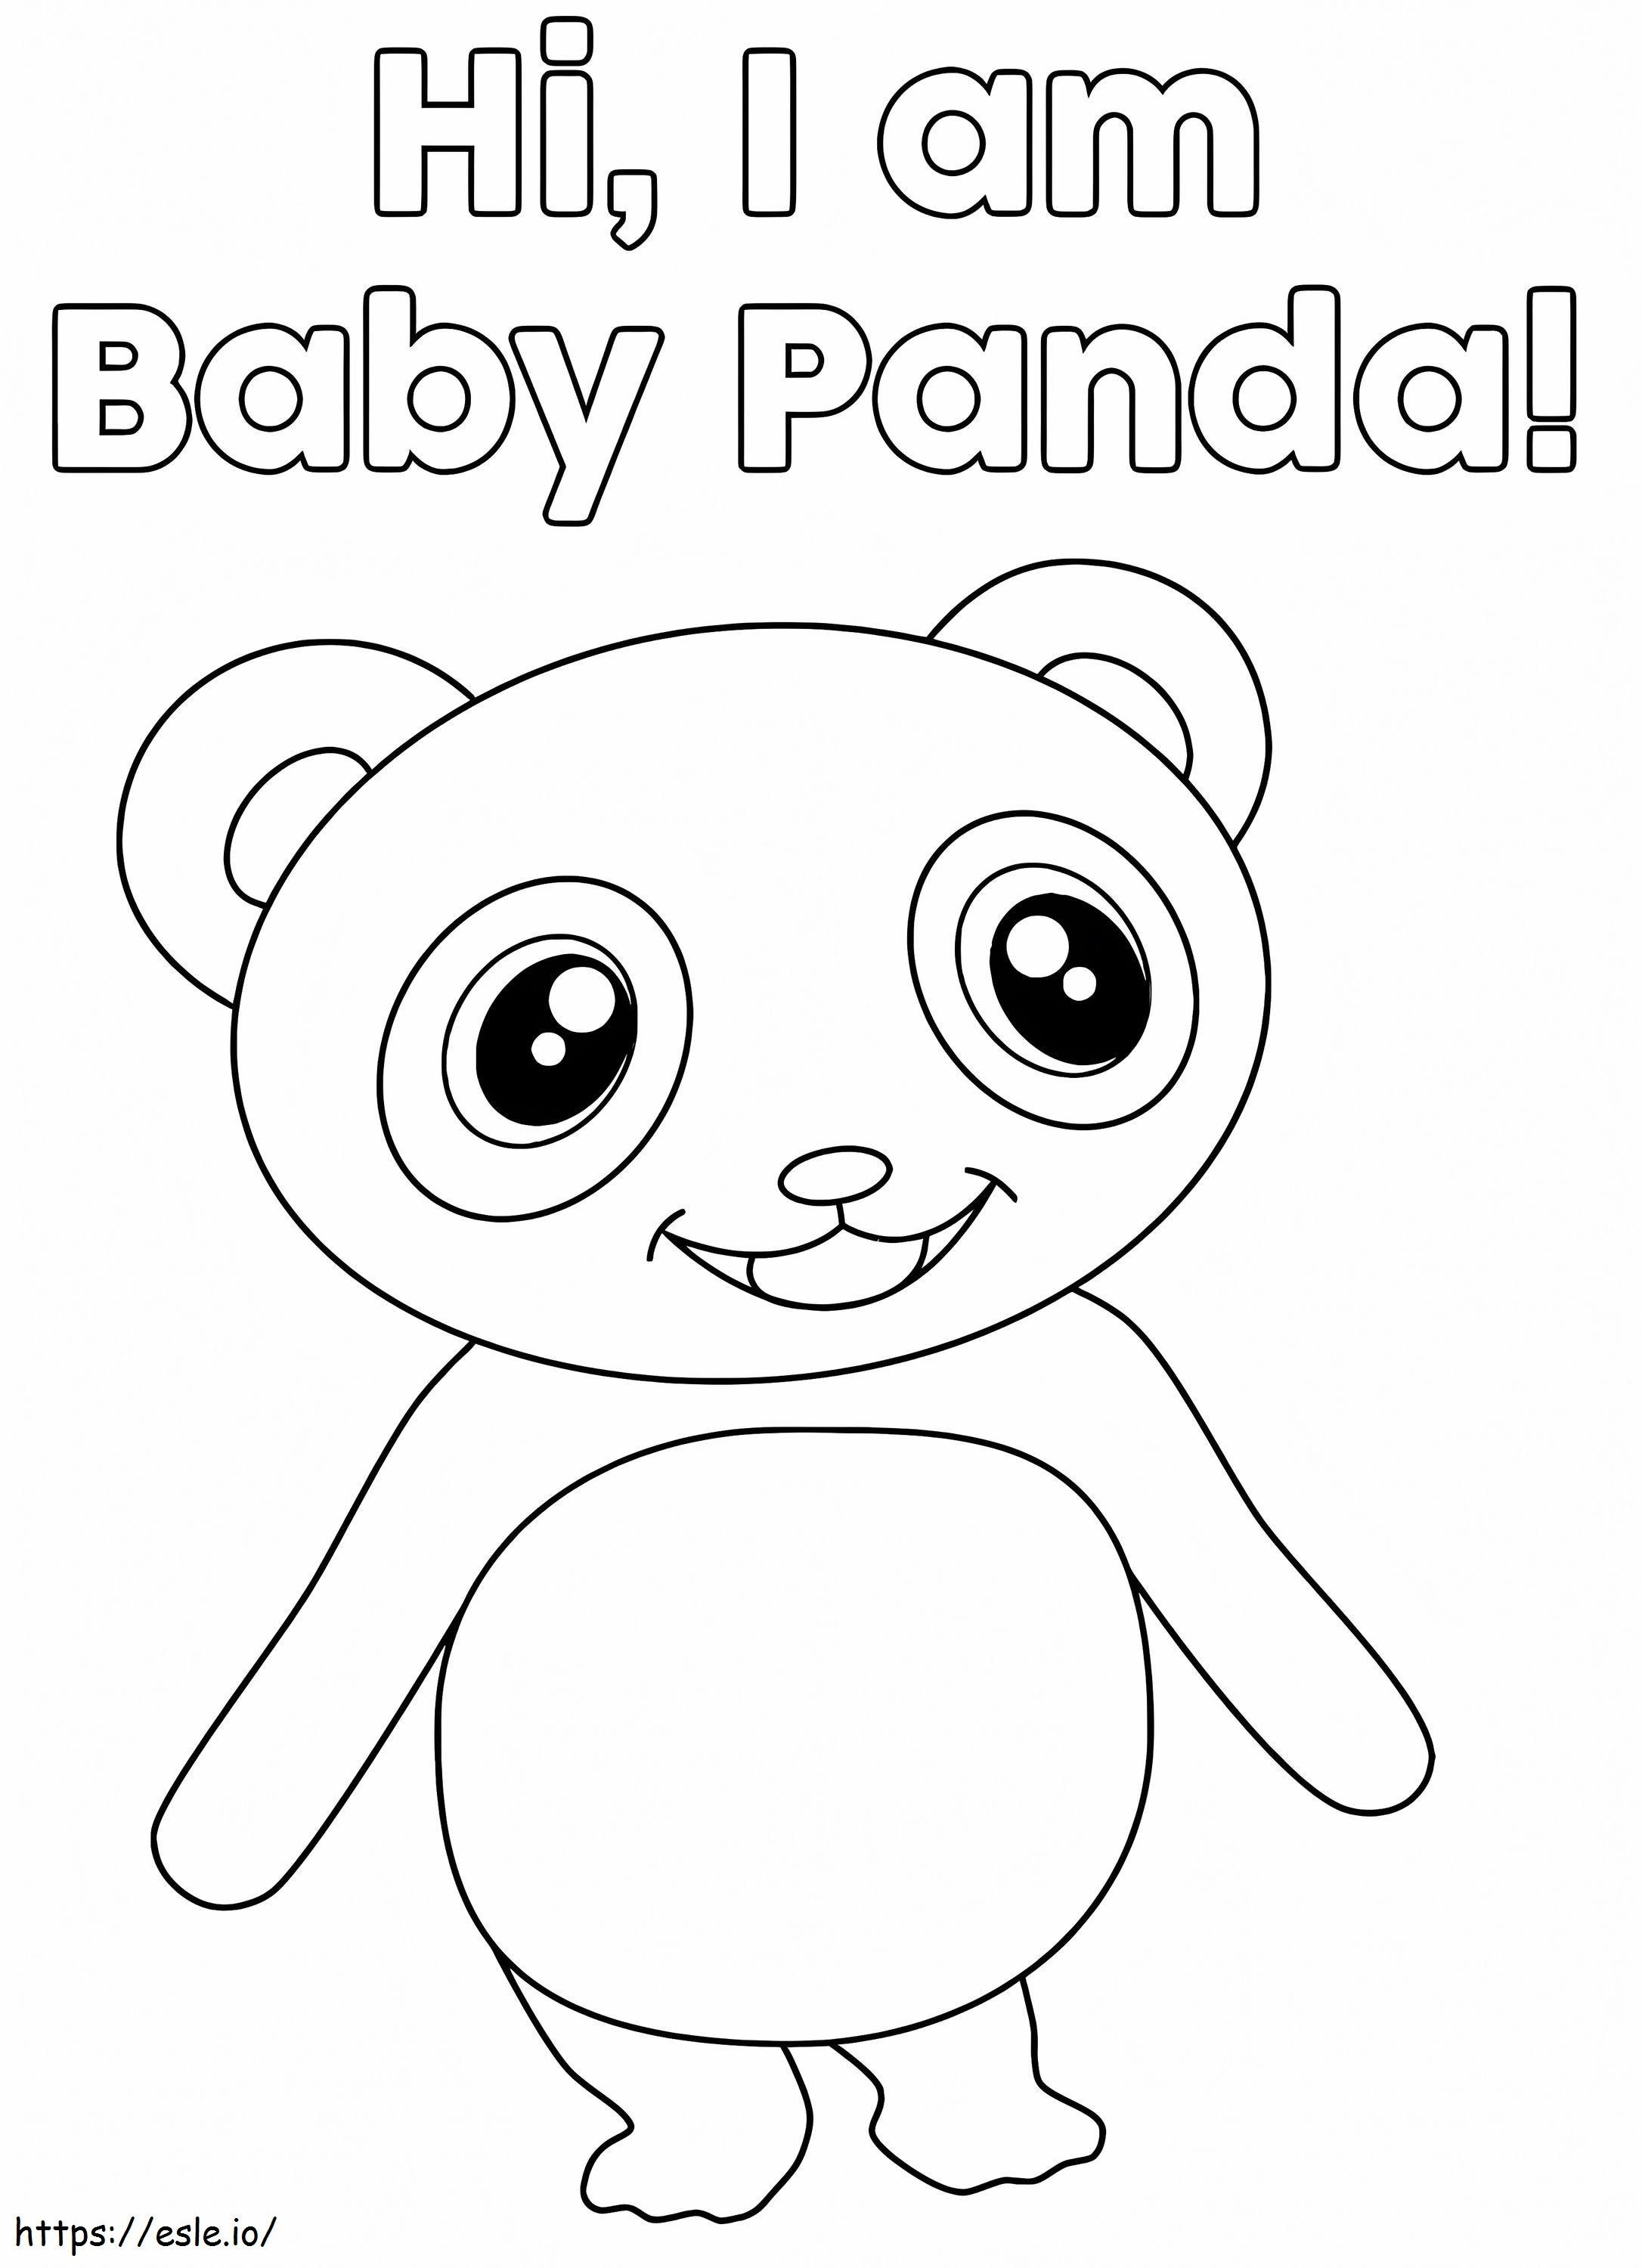 Baby Panda Little Baby Bum coloring page